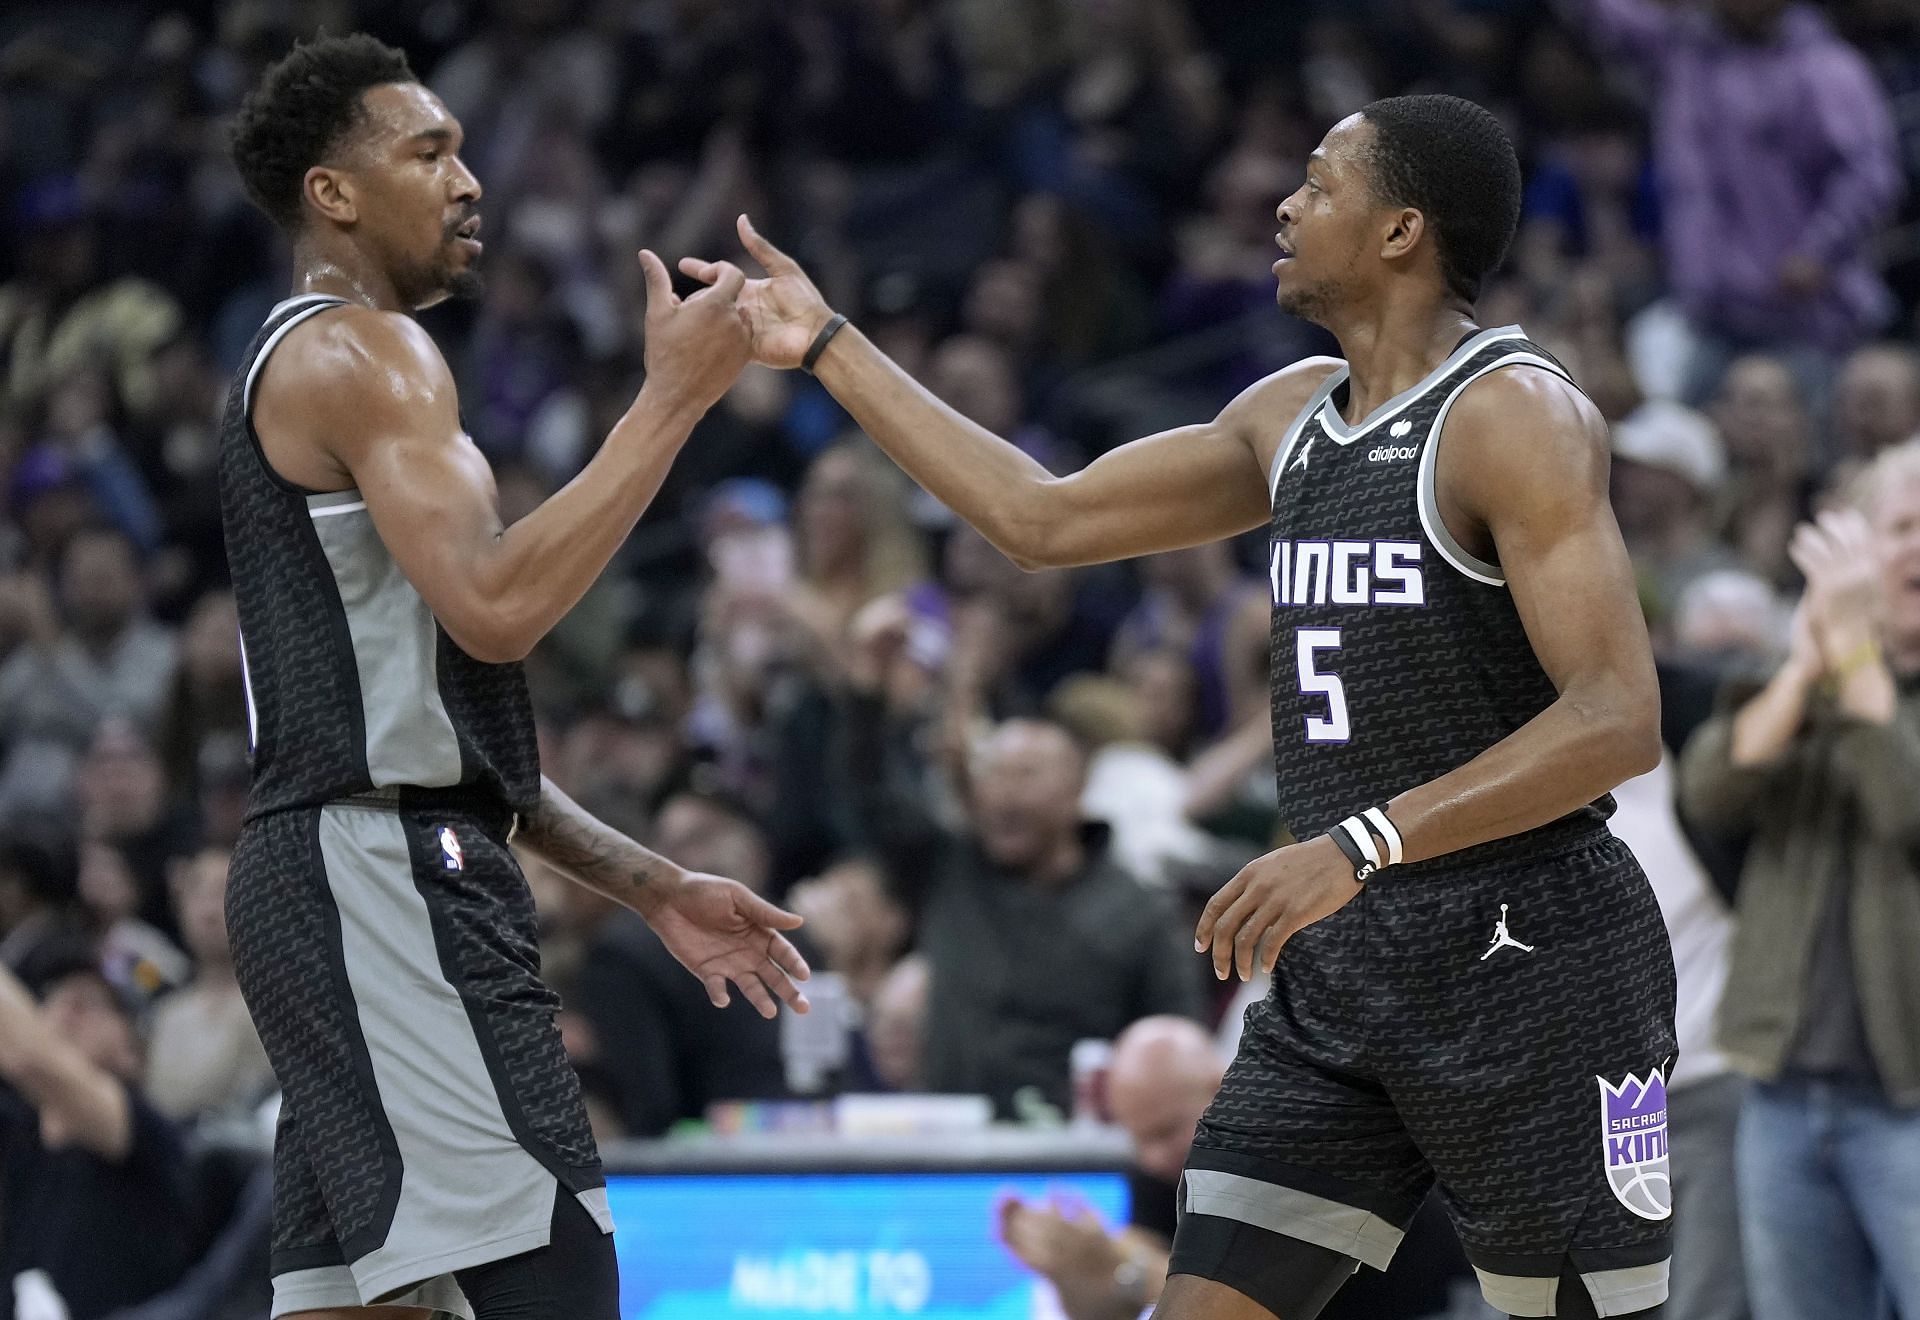 How De'Aaron Fox's clutch performance has pushed the Kings to another level